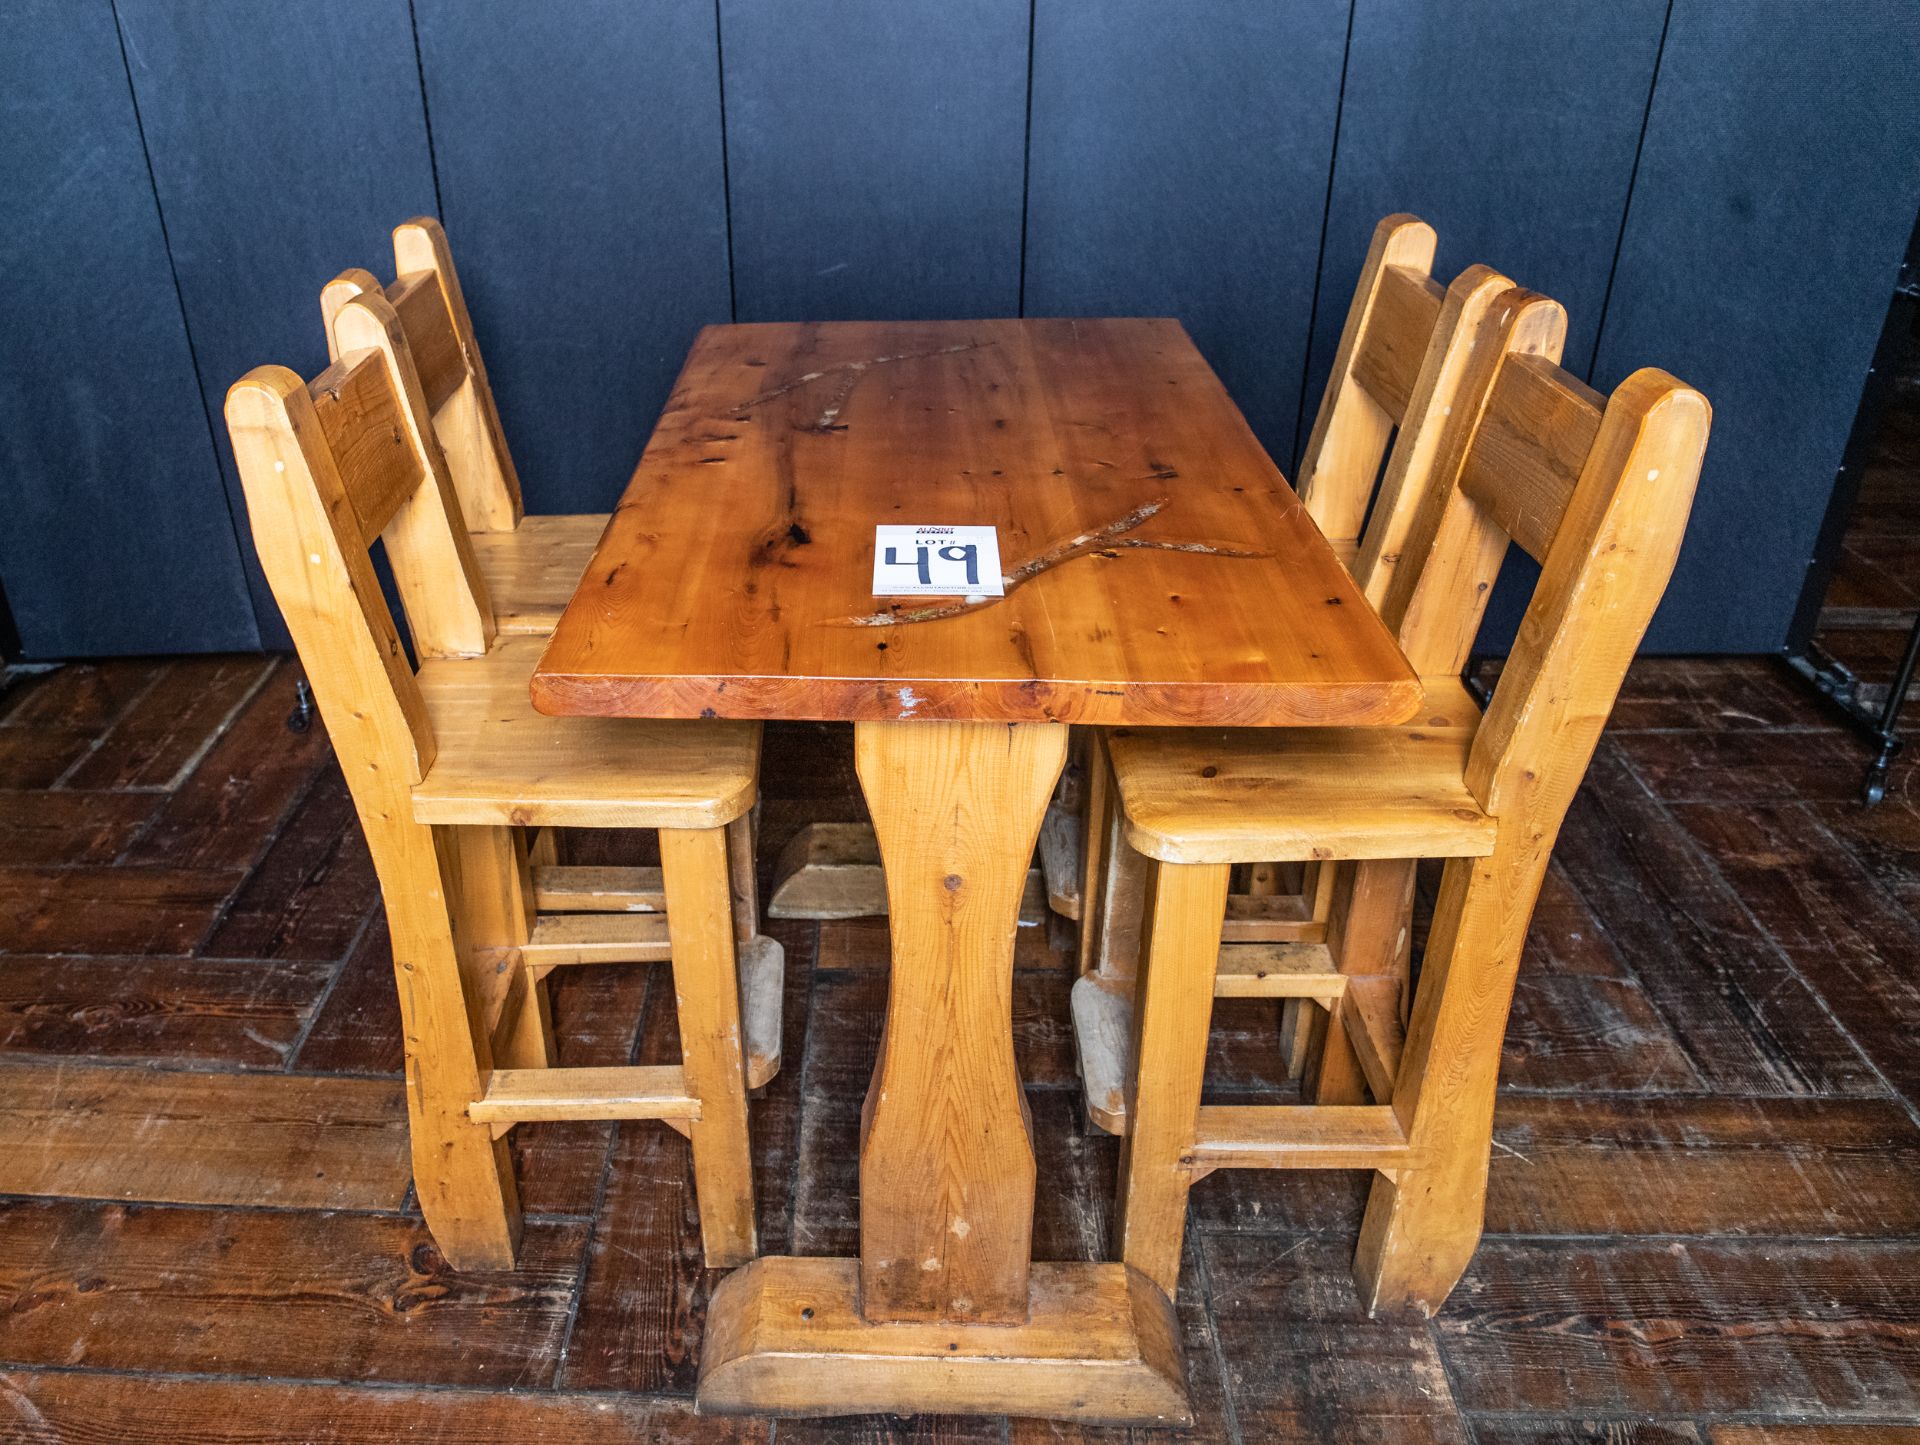 PUB TABLE WITH FOUR CHAIRS - TABLE L 48" W 29 1/2" H 41"